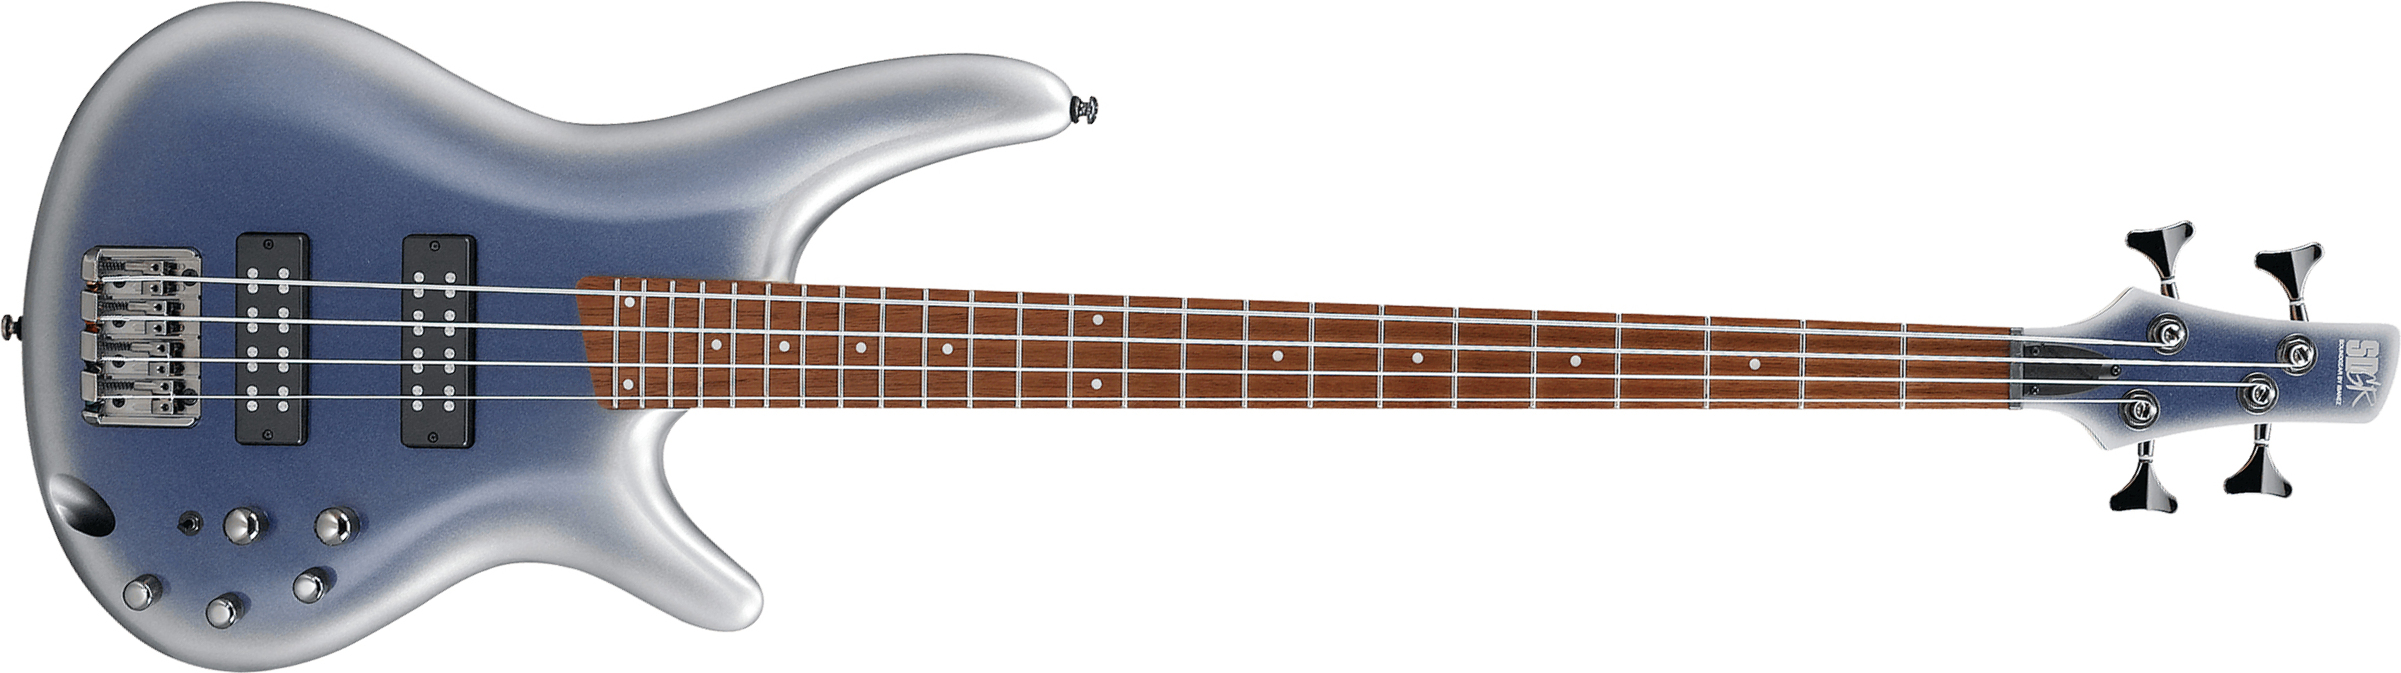 Ibanez Sr300e Nst Standard Active Jat - Night Snow Burst - Solid body electric bass - Main picture